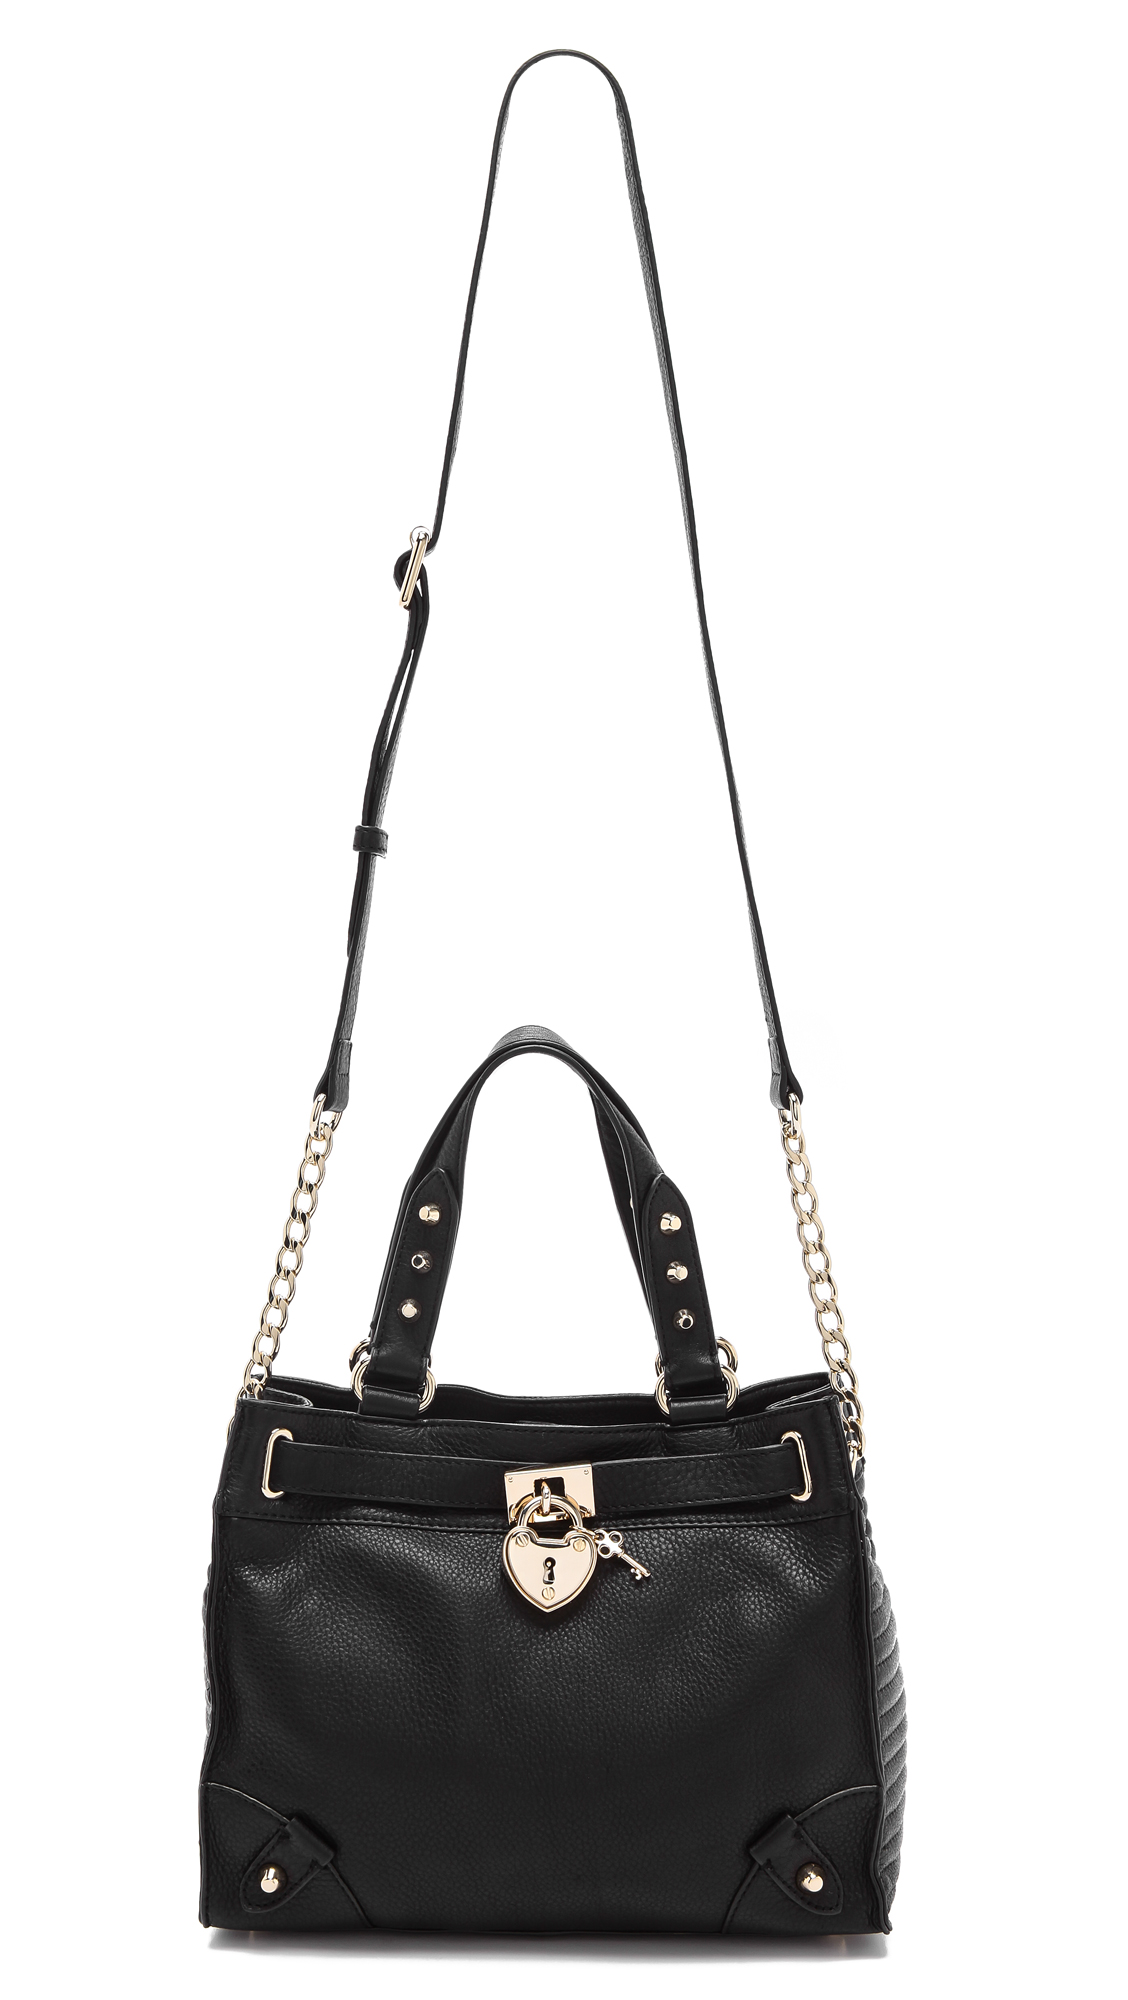 Lyst - Juicy Couture Robertson Mini Daydreamer Bag in Black